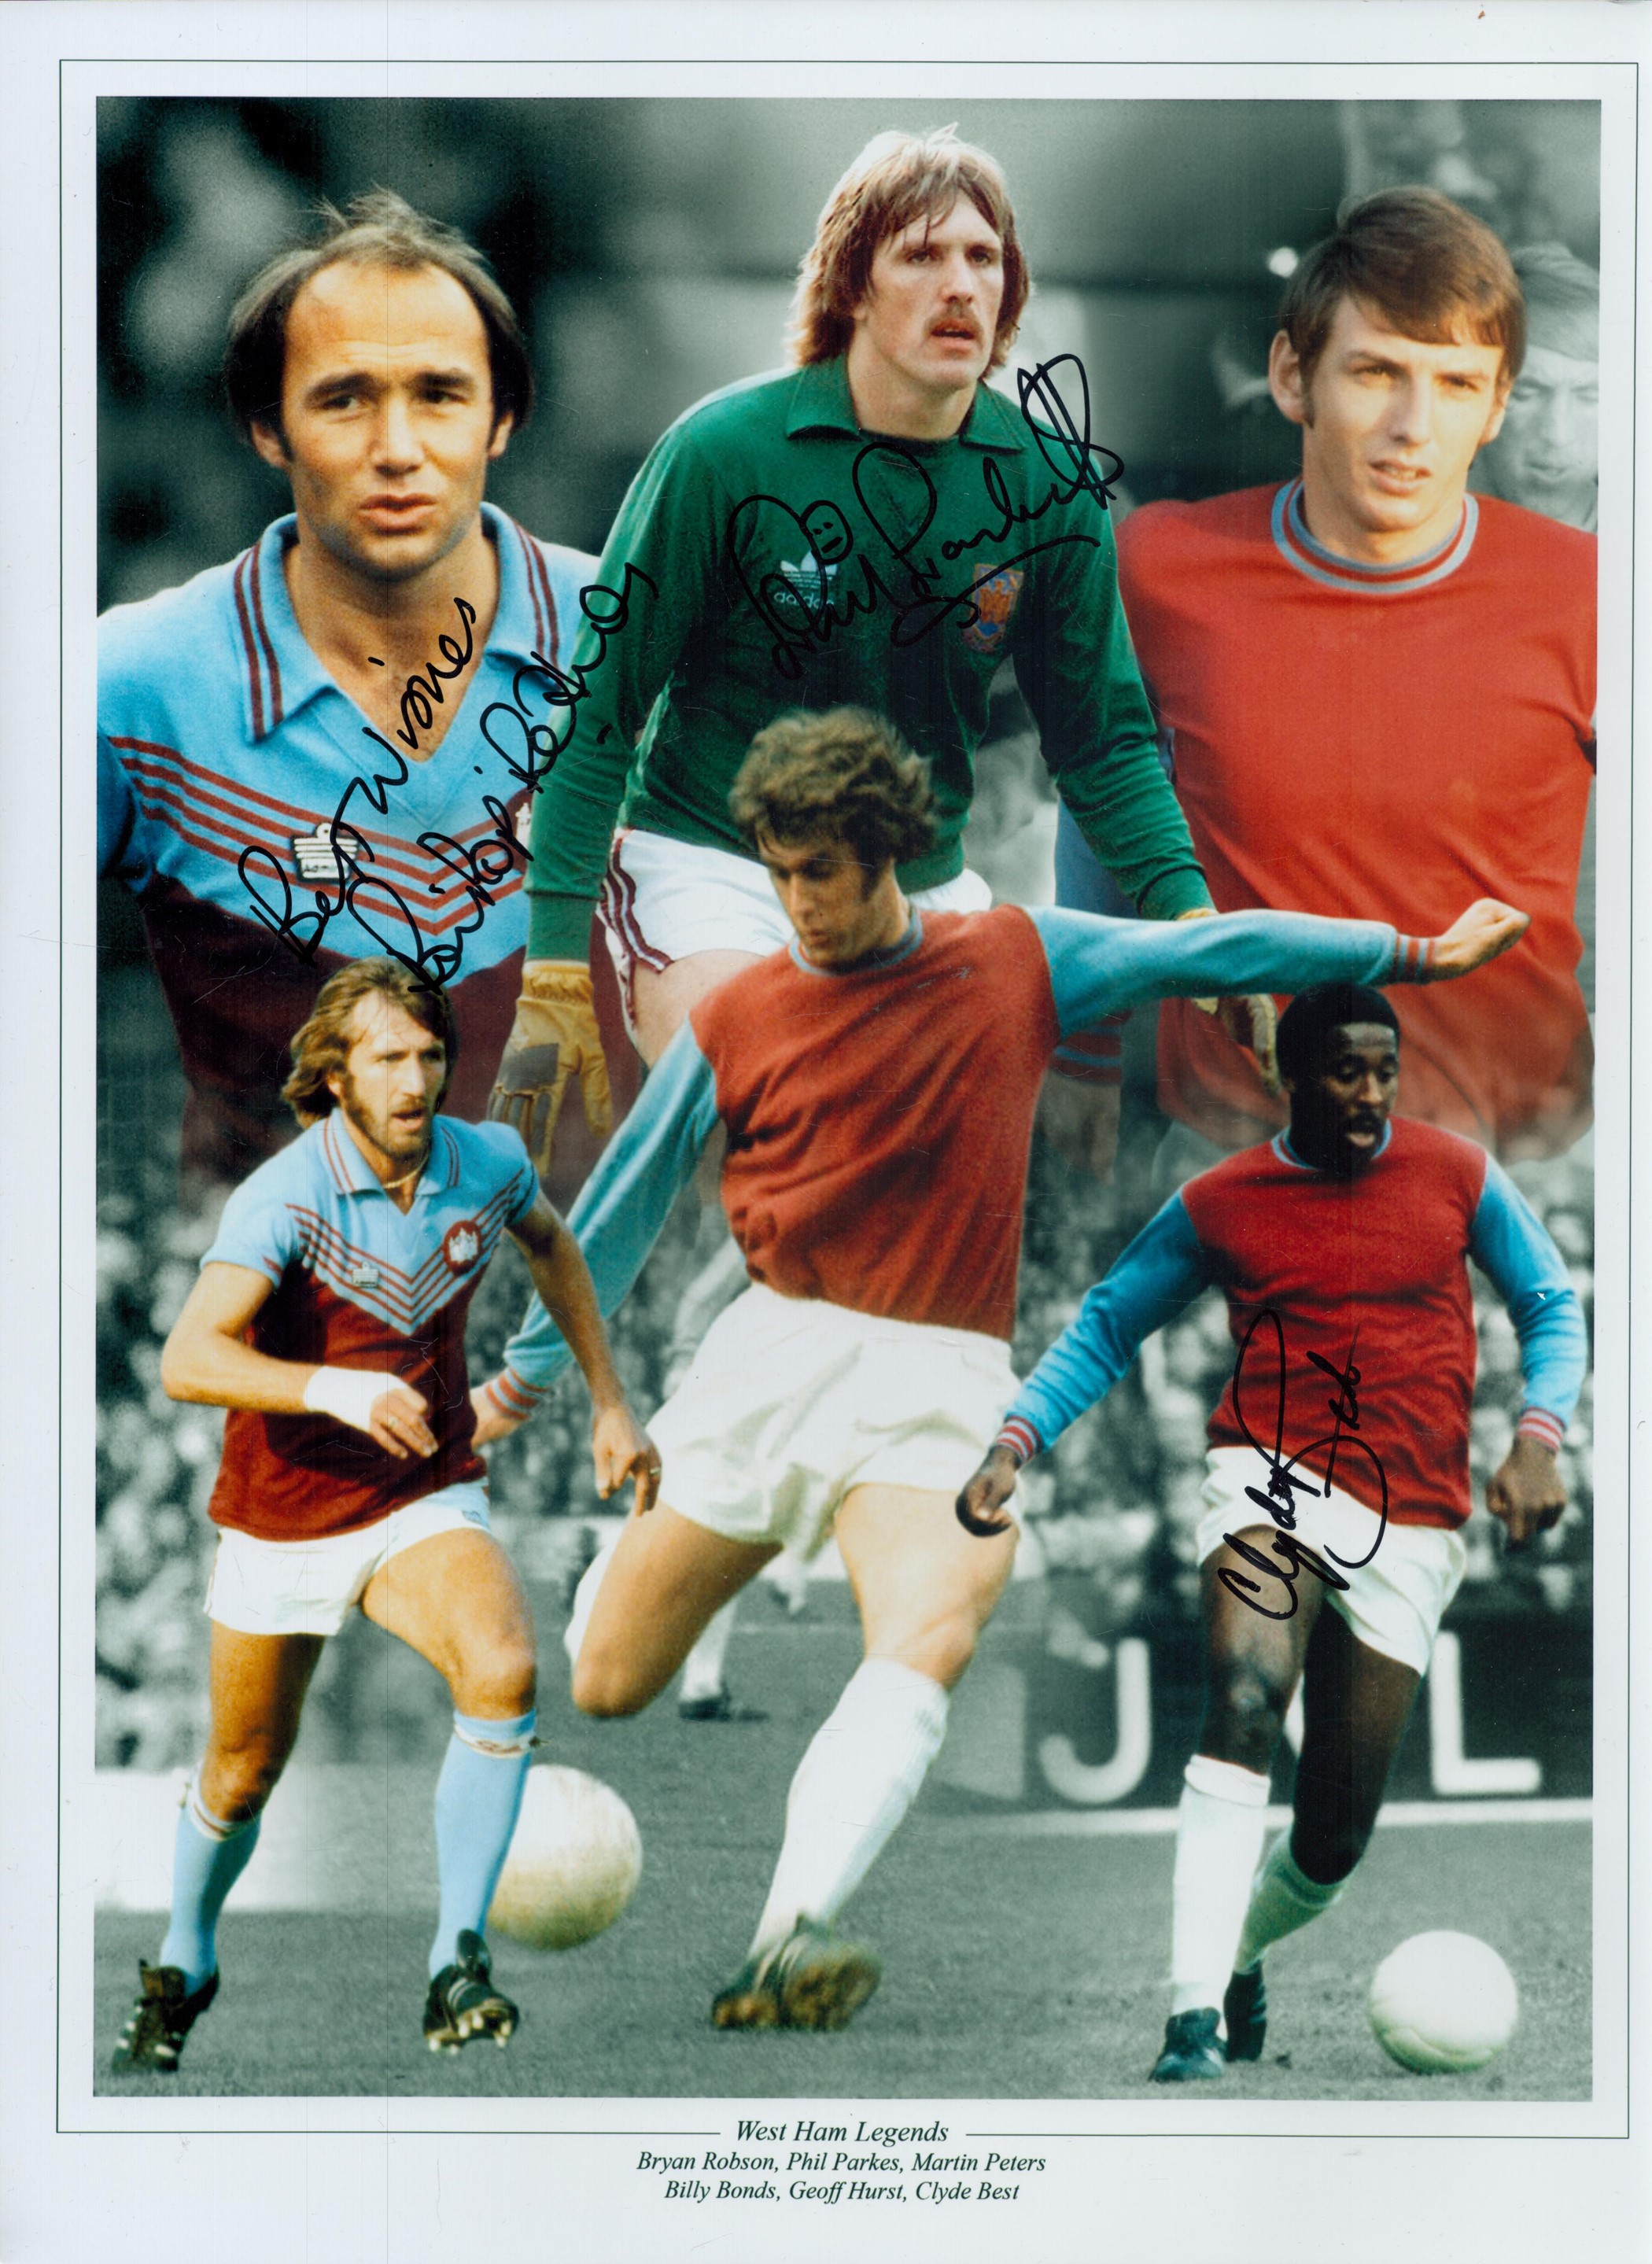 West Ham Legends Bryan Pop Robson, Phil Parkes and Clyde Best signed 16x12 inch colourised montage